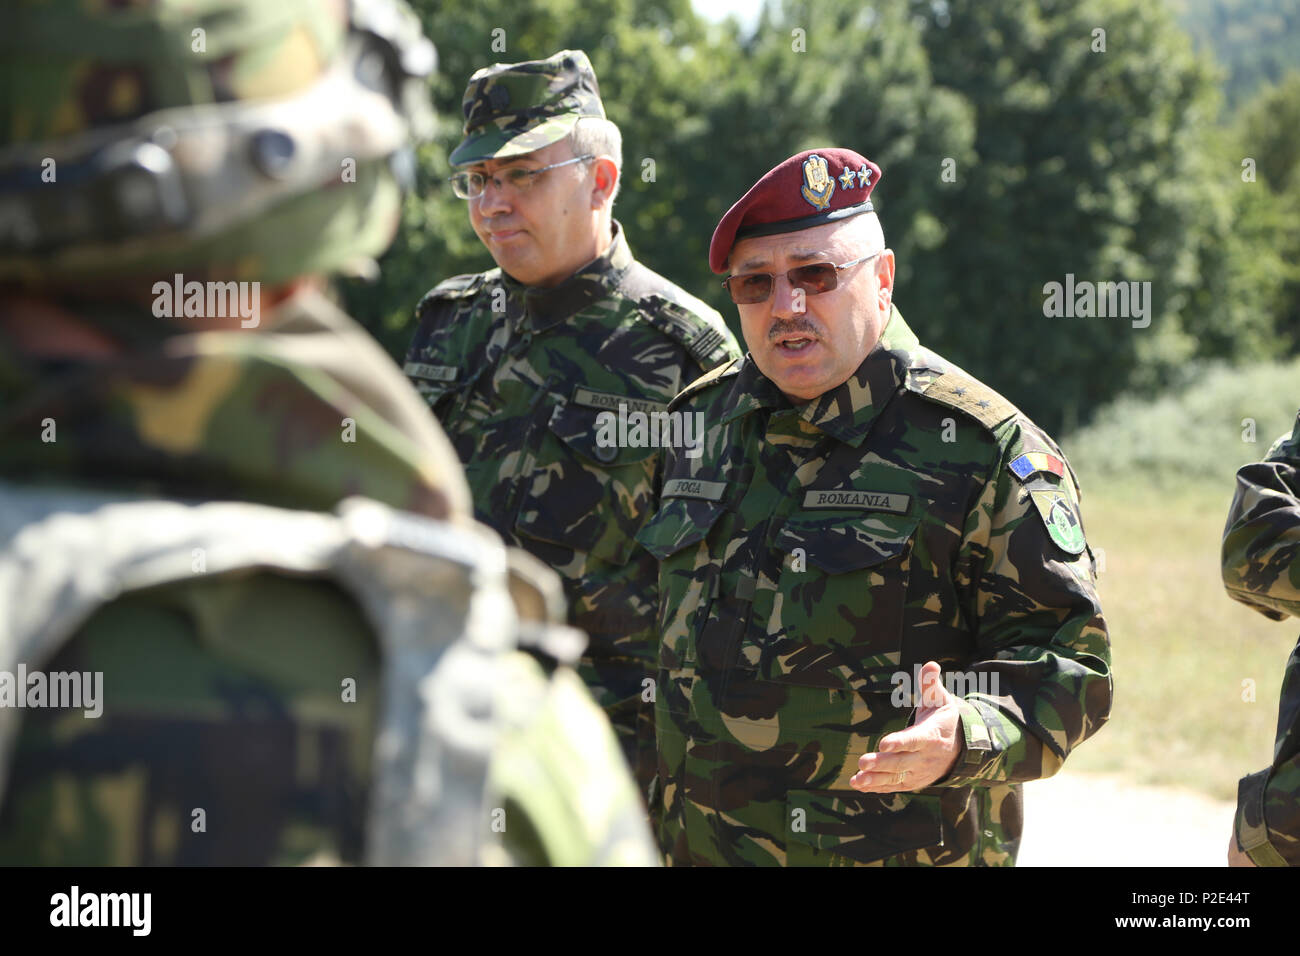 Romanian soldier Maj. Gen. Petrica lucian Foca, Commander of the 2nd Infantry Division, Getica speaks with Romanian soldiers of the 33rd Mountain Battalion Posada while conducting a Distinguished Visitors tour during exercise Combined Resolve VII at the U.S. Army’s Joint Multinational Readiness Center in Hohenfels Germany, Sept. 6, 2016. Combined Resolve VII is a 7th Army Training Command, U.S. Army Europe-directed exercise, taking place at the Grafenwoehr and Hohenfels Training Areas, Aug. 8 to Sept. 15, 2016. The exercise is designed to train the Army’s regionally allocated forces to the U.S Stock Photo